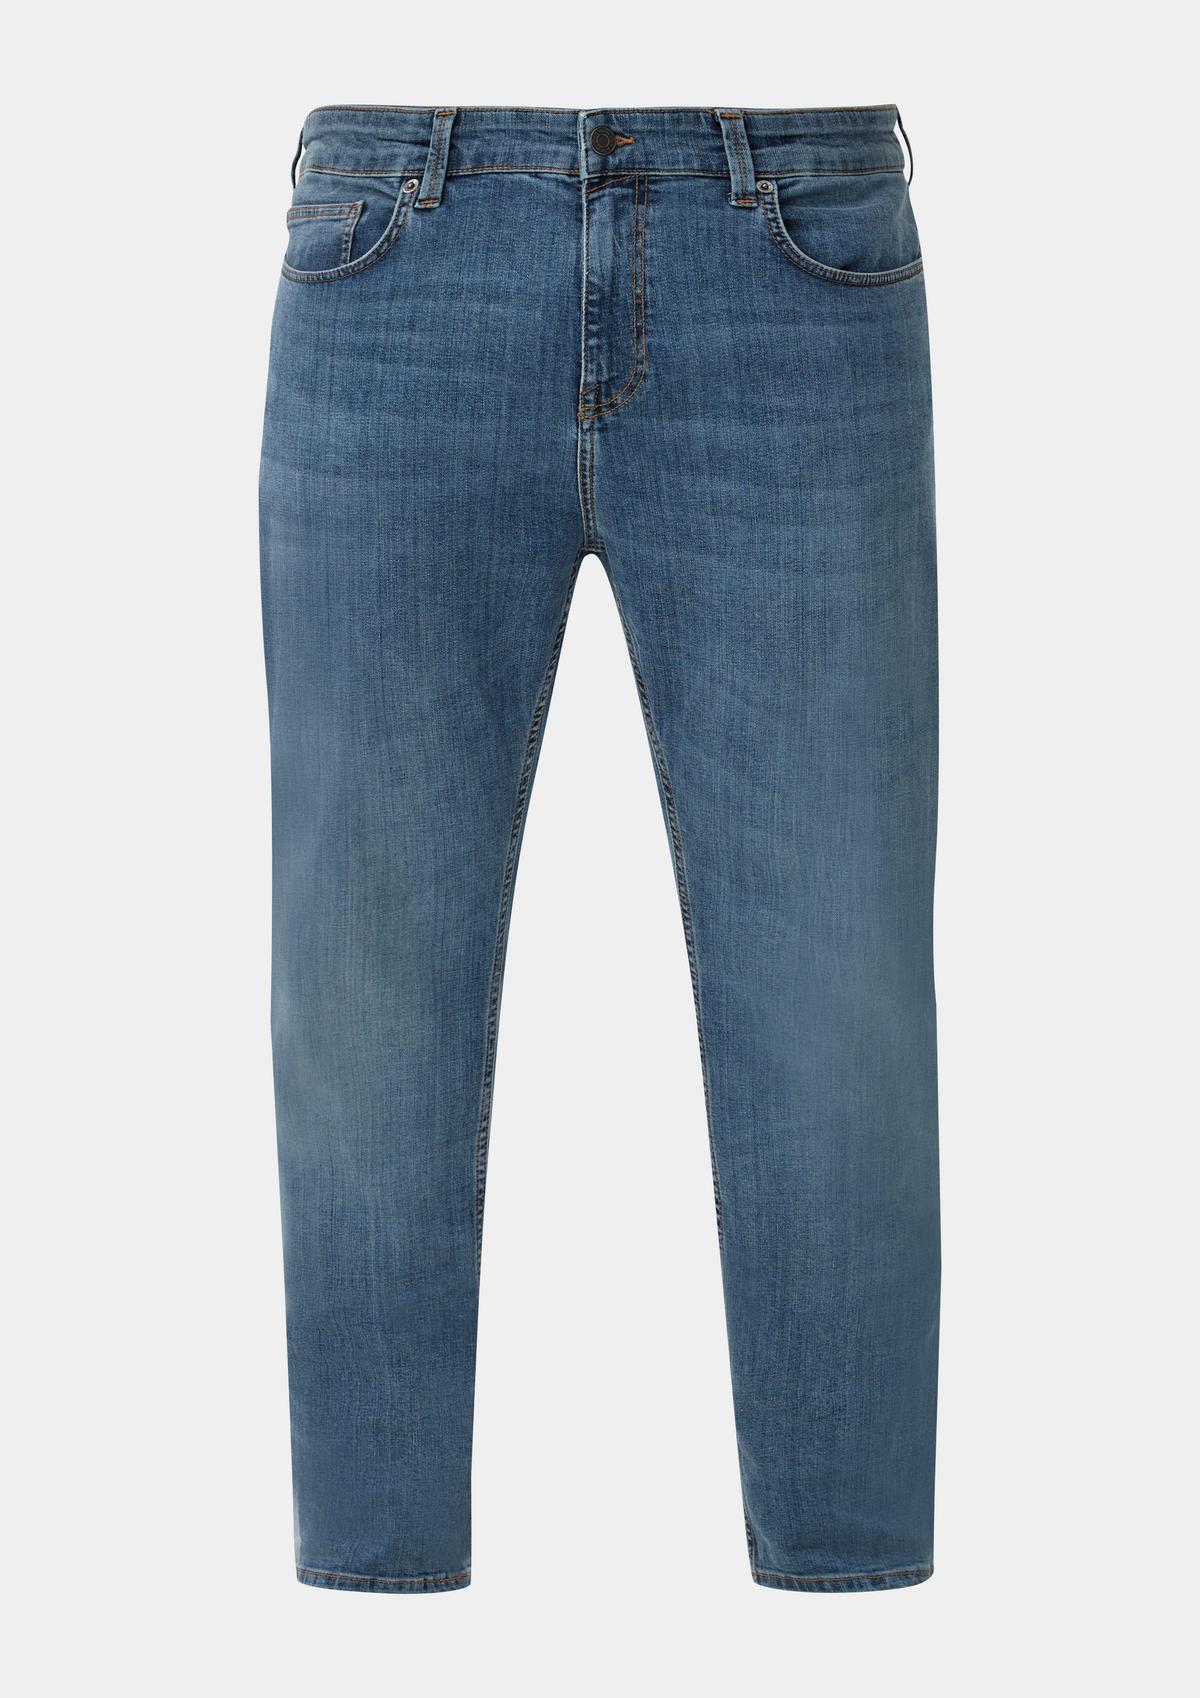 s.Oliver Jeans Casby / Relaxed Fit / Mid Rise / Straight Leg